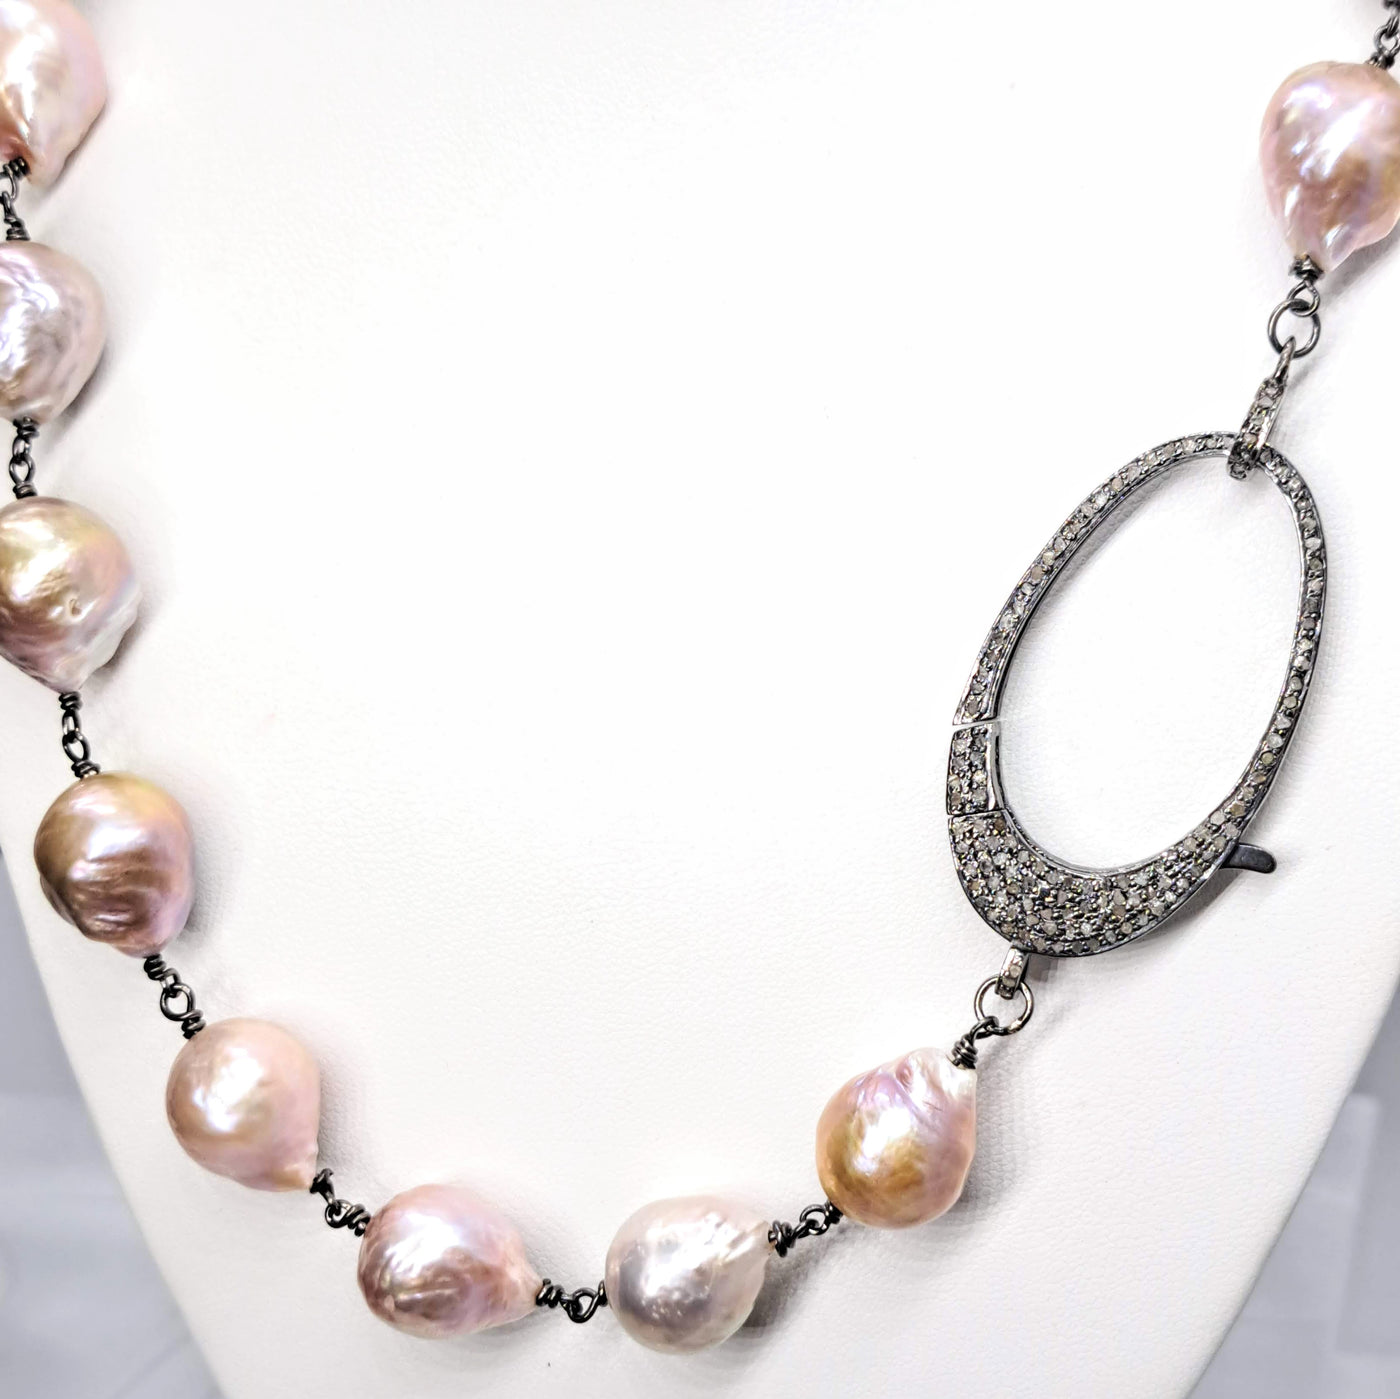 "Rock N Roll Pearls" 20" Necklace - Baroque Edison Pearls, Diamonds, Oxidized Sterling